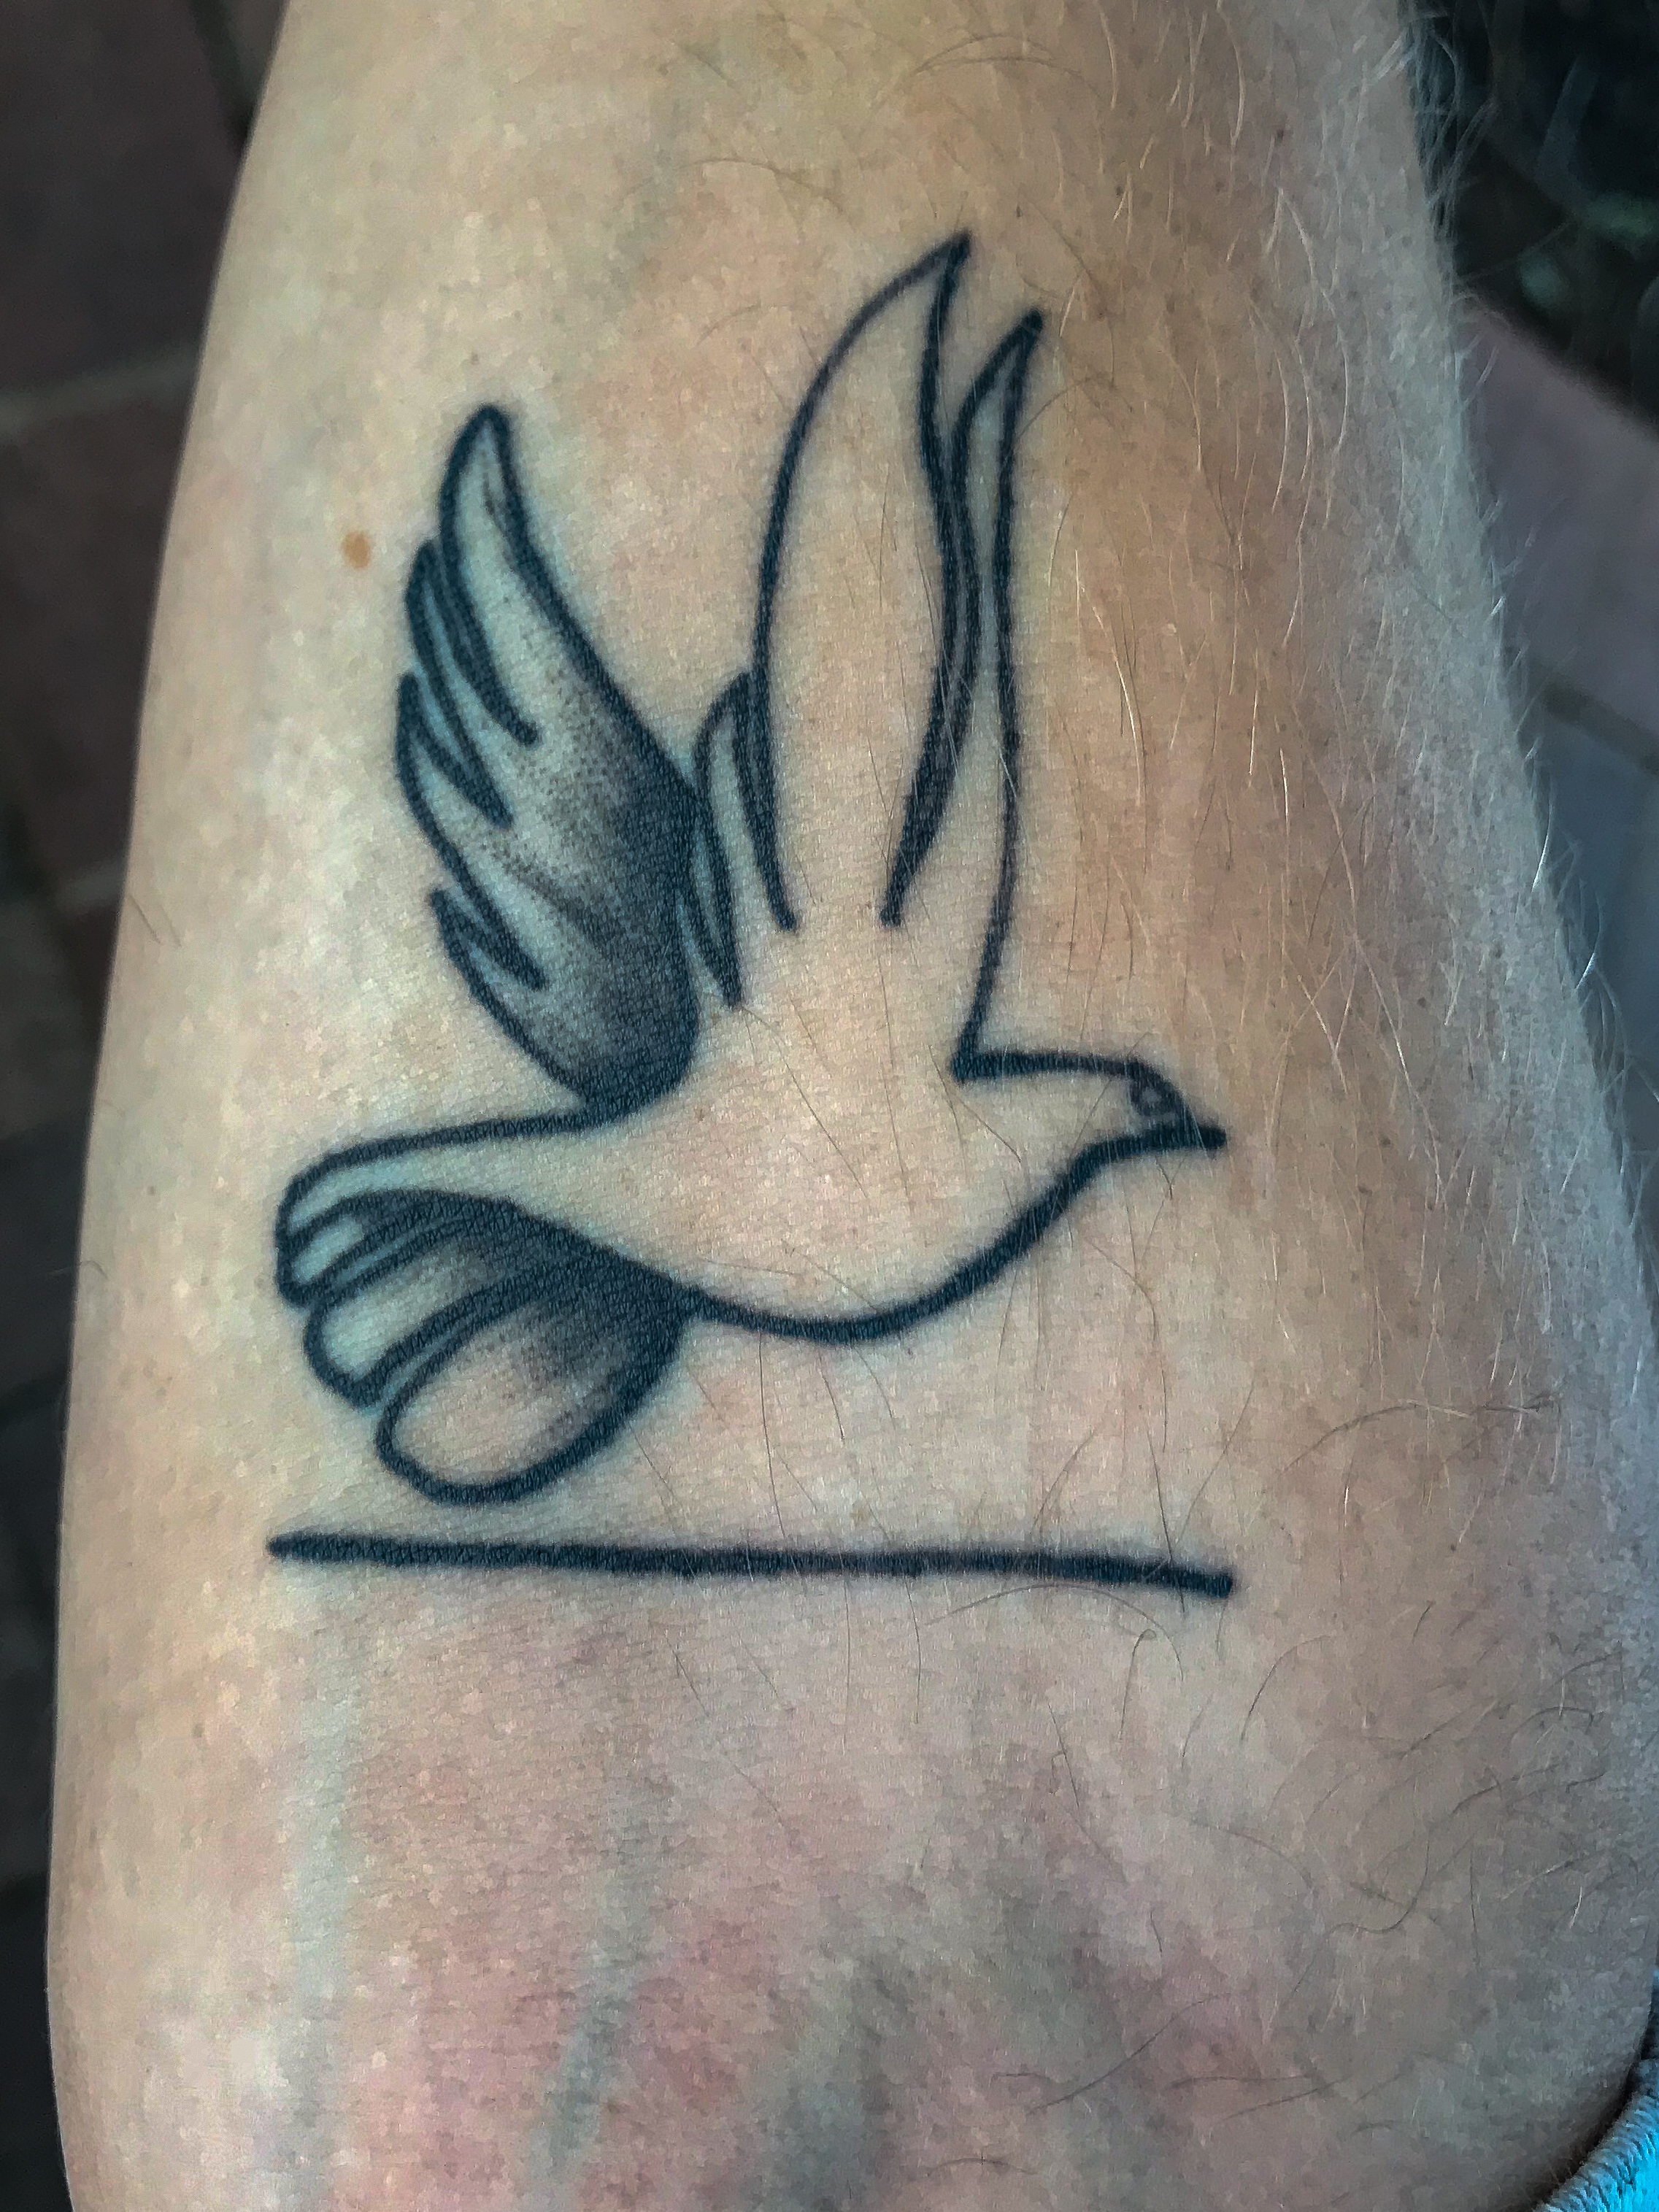 This is senior Jon Kesey. Kesey got this tattoo after his father passed away from brain cancer. When his dad was going through treatments, he would tell Jon no matter what happened, everything would be fine because we have been given the Holy Spirit